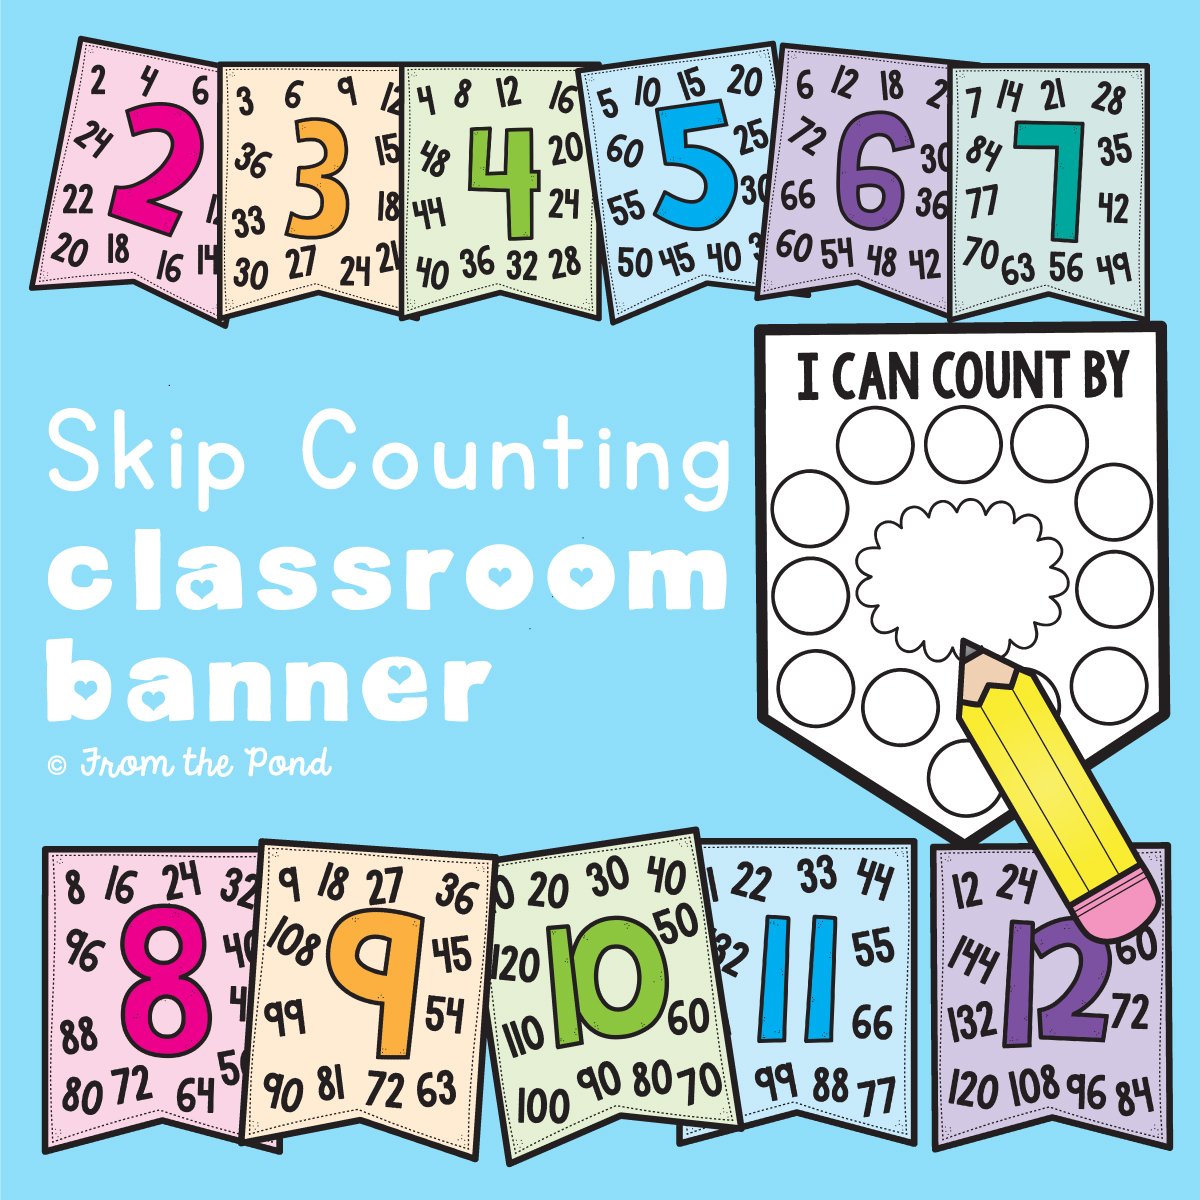 Skip Counting Banner